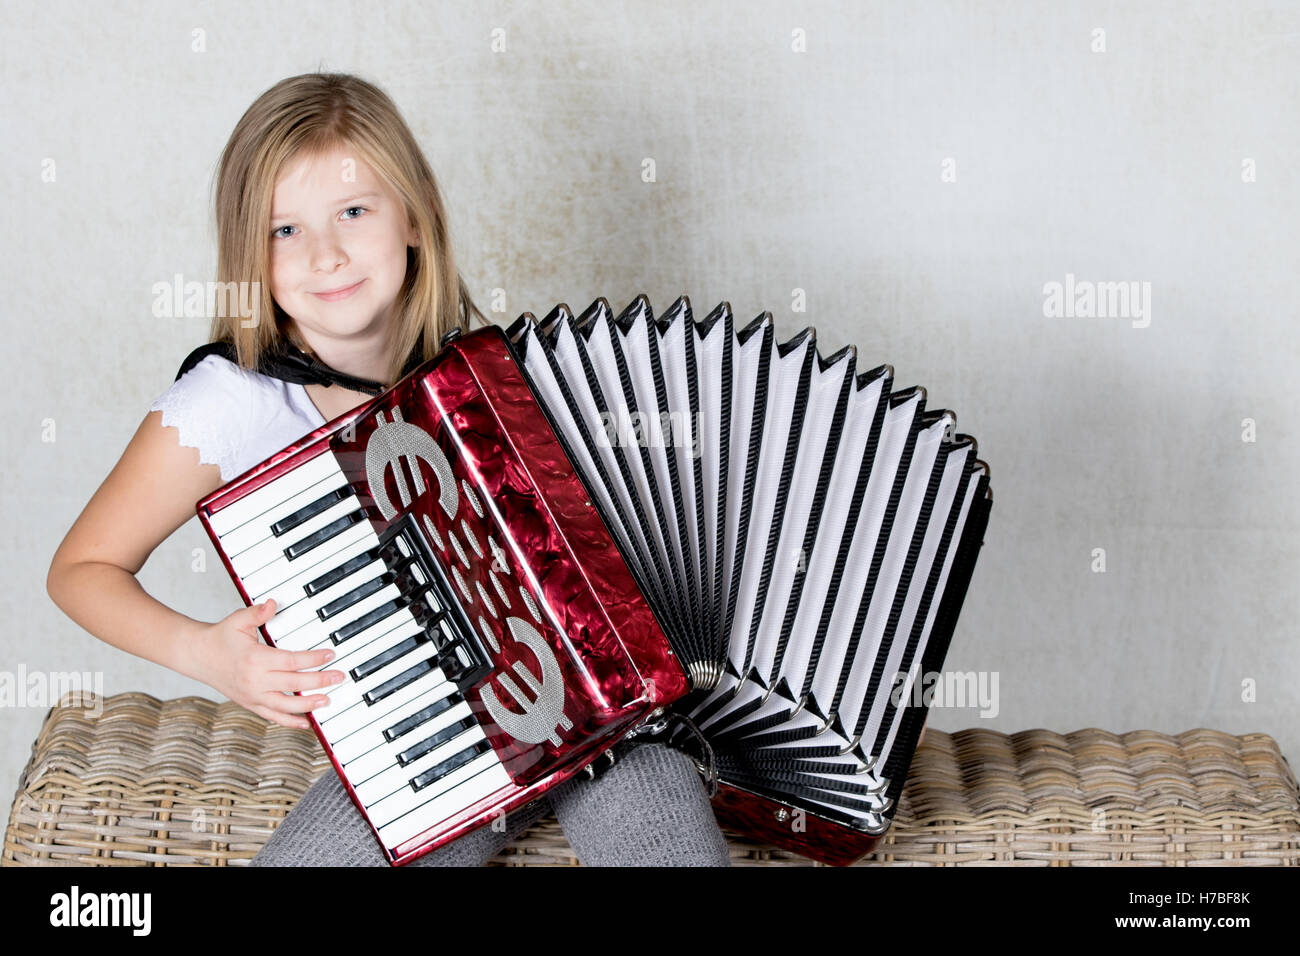 Girl playing an Accordion with a smile on her face Stock Photo